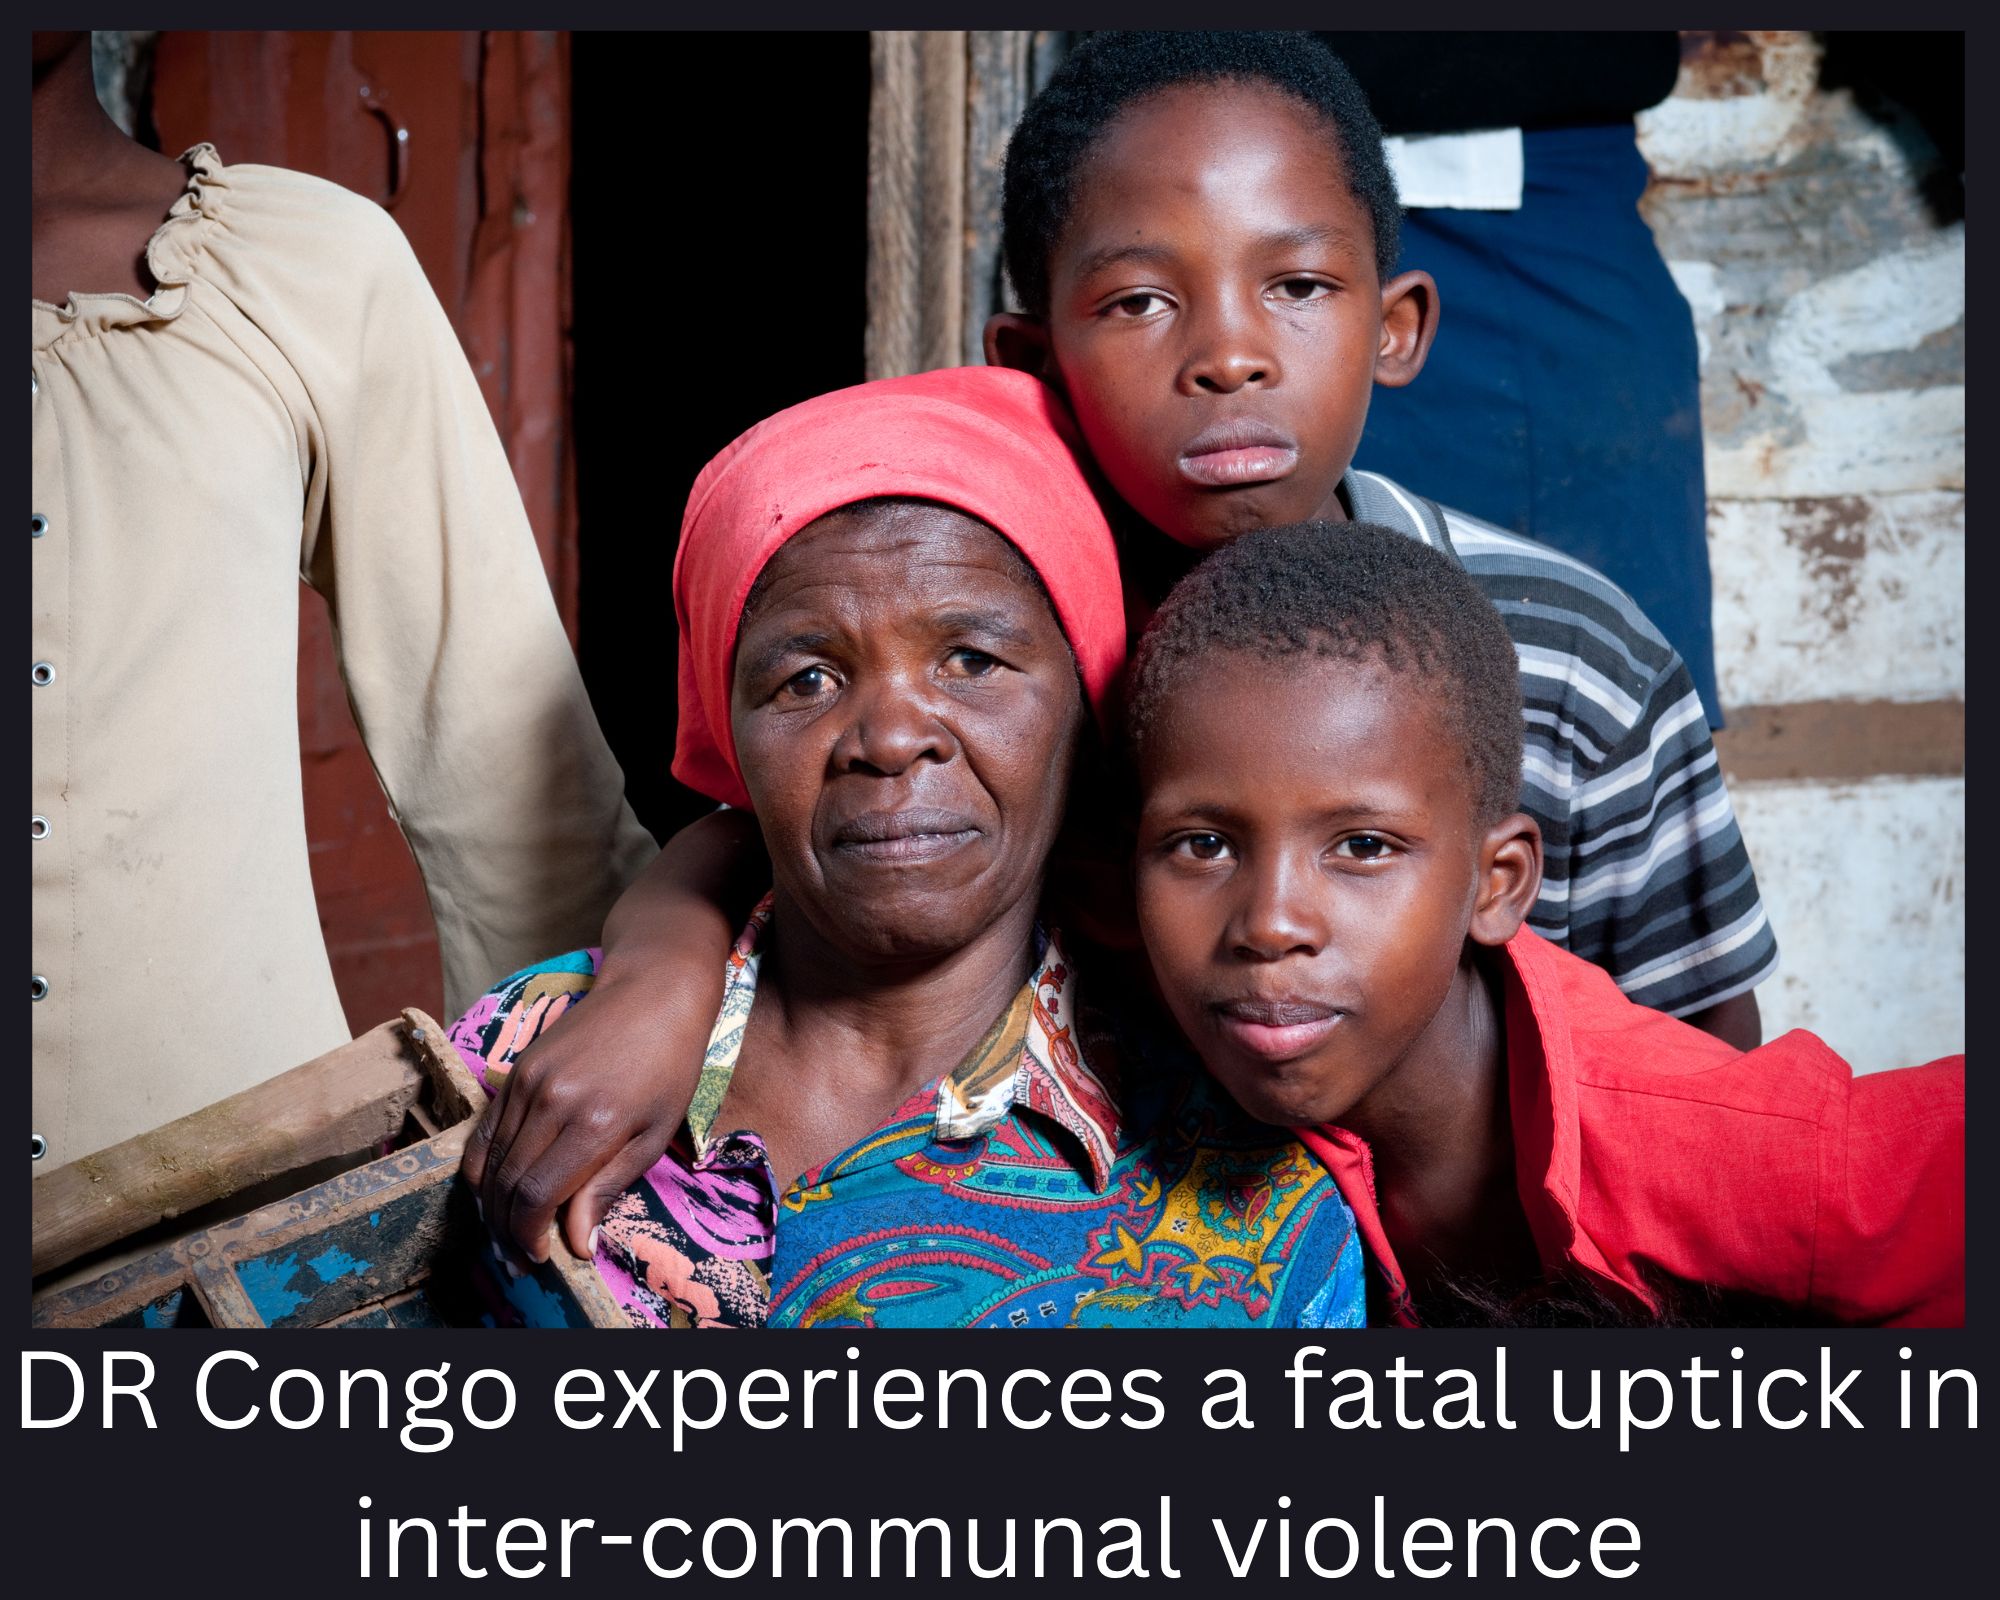 DR Congo experiences a fatal uptick in inter-communal violence